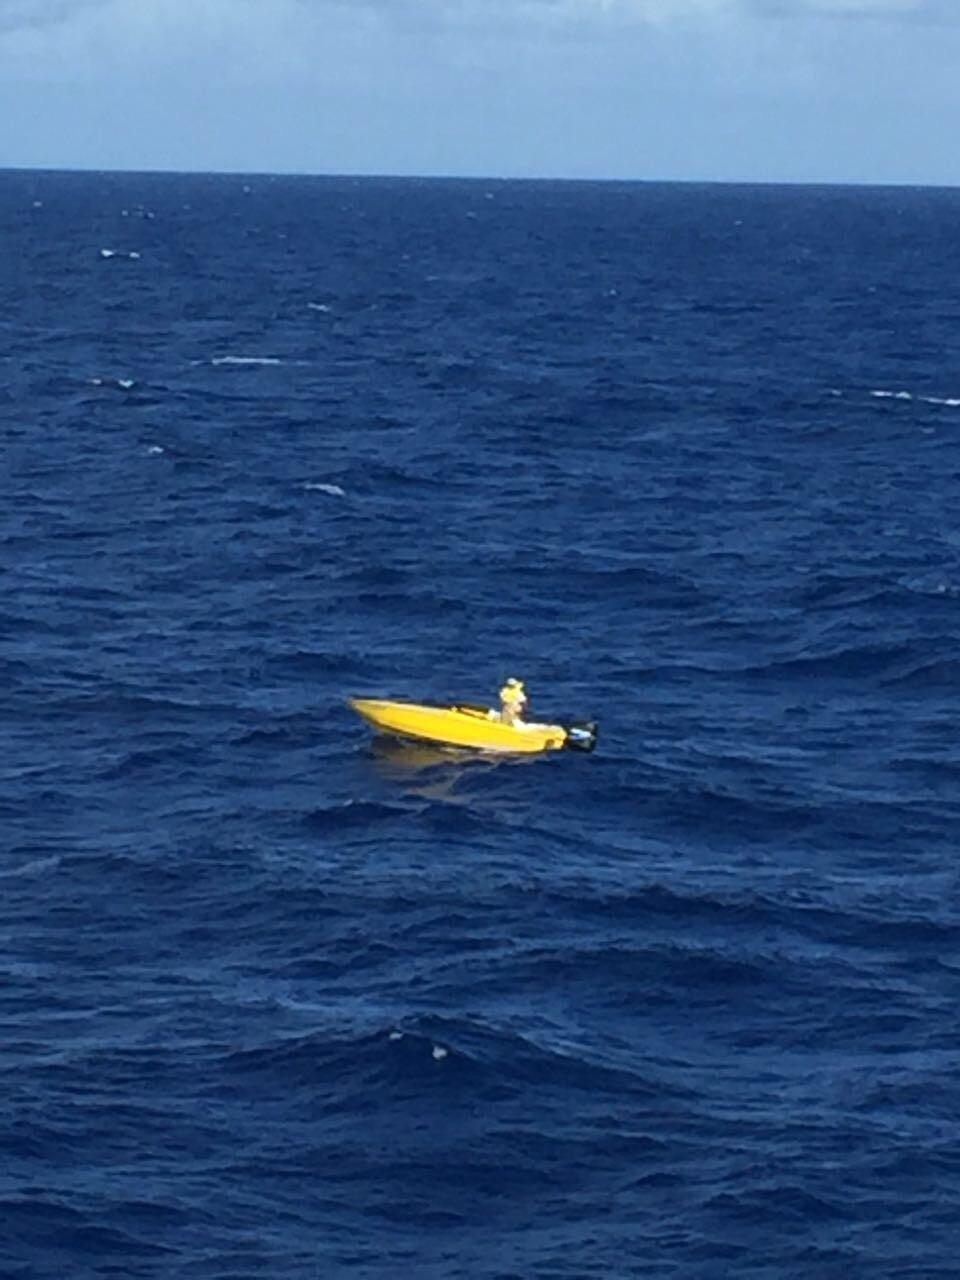 Coast Guard searching for missing boater more than 25 miles off North Miami Beach